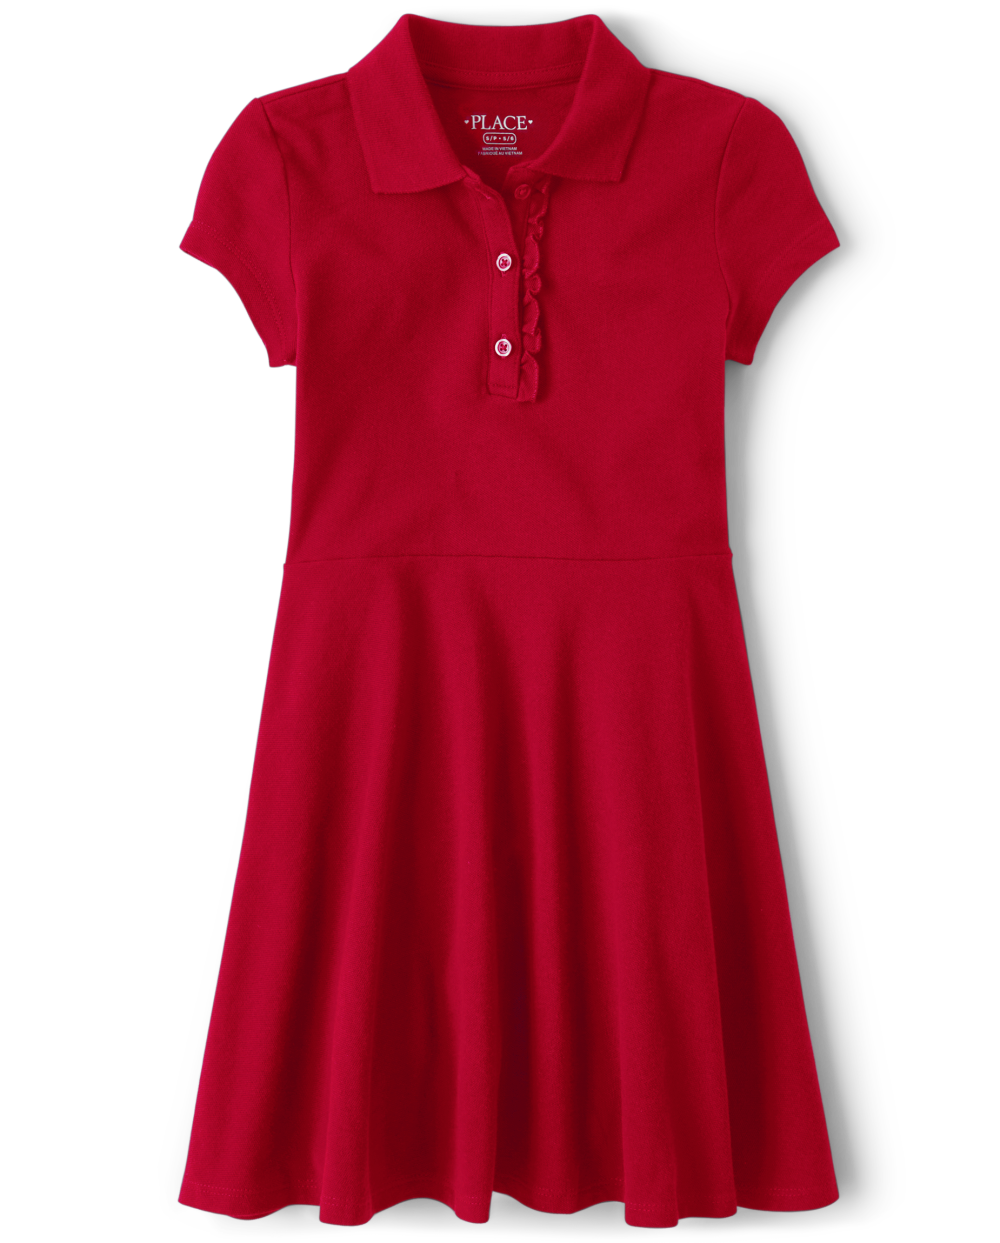 Girls Ruffle Trim Collared Short Sleeves Sleeves Above the Knee Dress